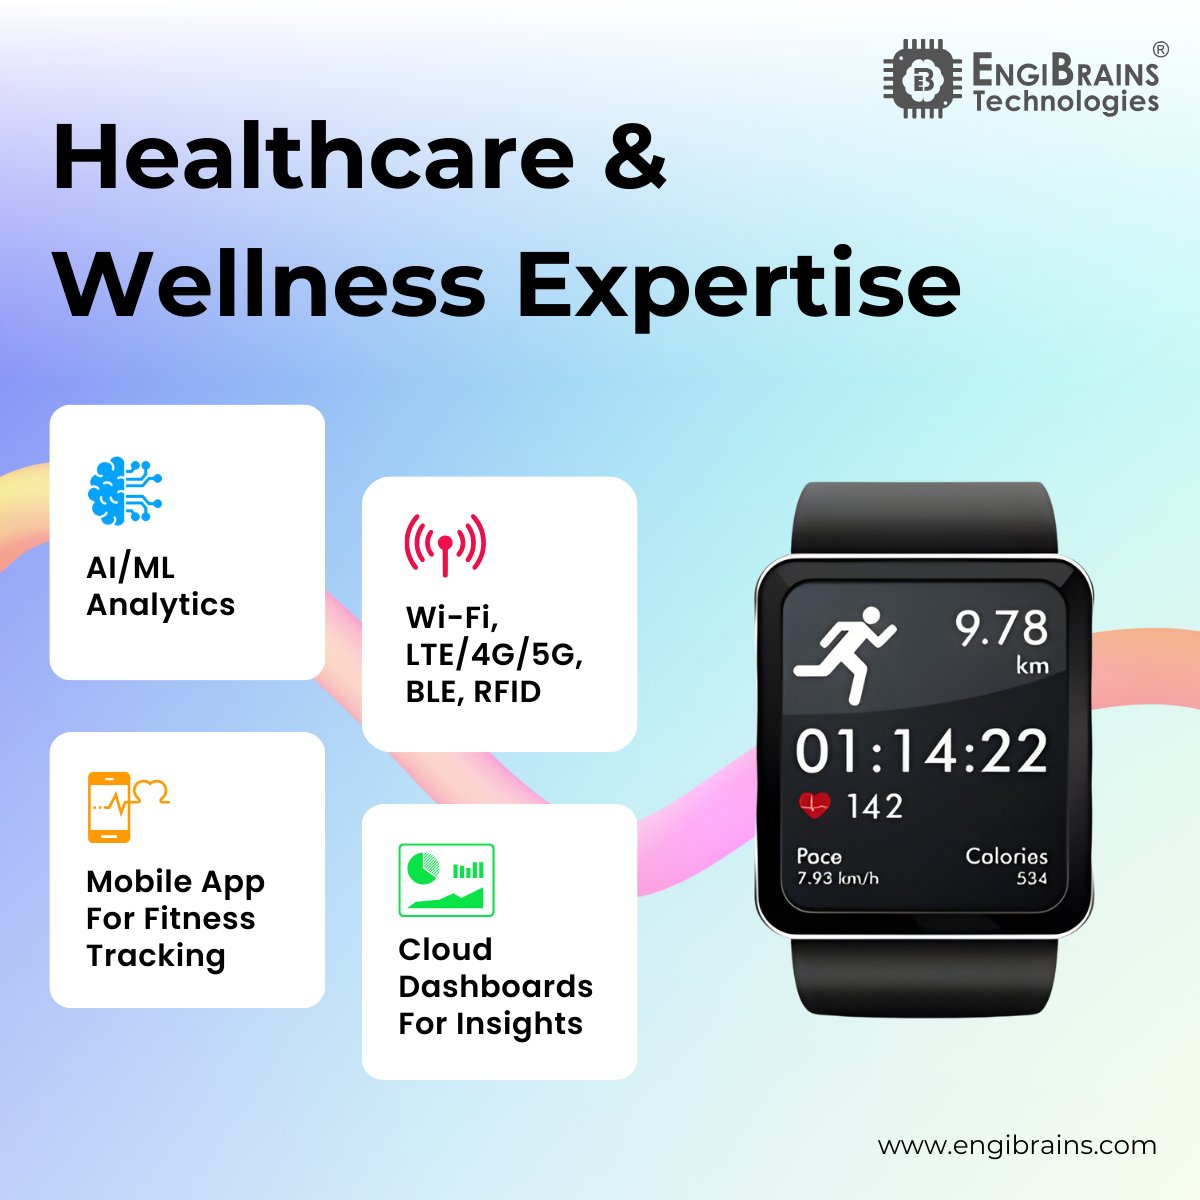 Discover our expertise in Embedded Product Engineering Services, tailored specifically for the Healthcare & Wellness Industry!
engibrains.com

#healthtechinnovation #healthandwellness #advancedconnectivity #aianalytics #clouddashboard #embeddedsystems #firmware  #iot